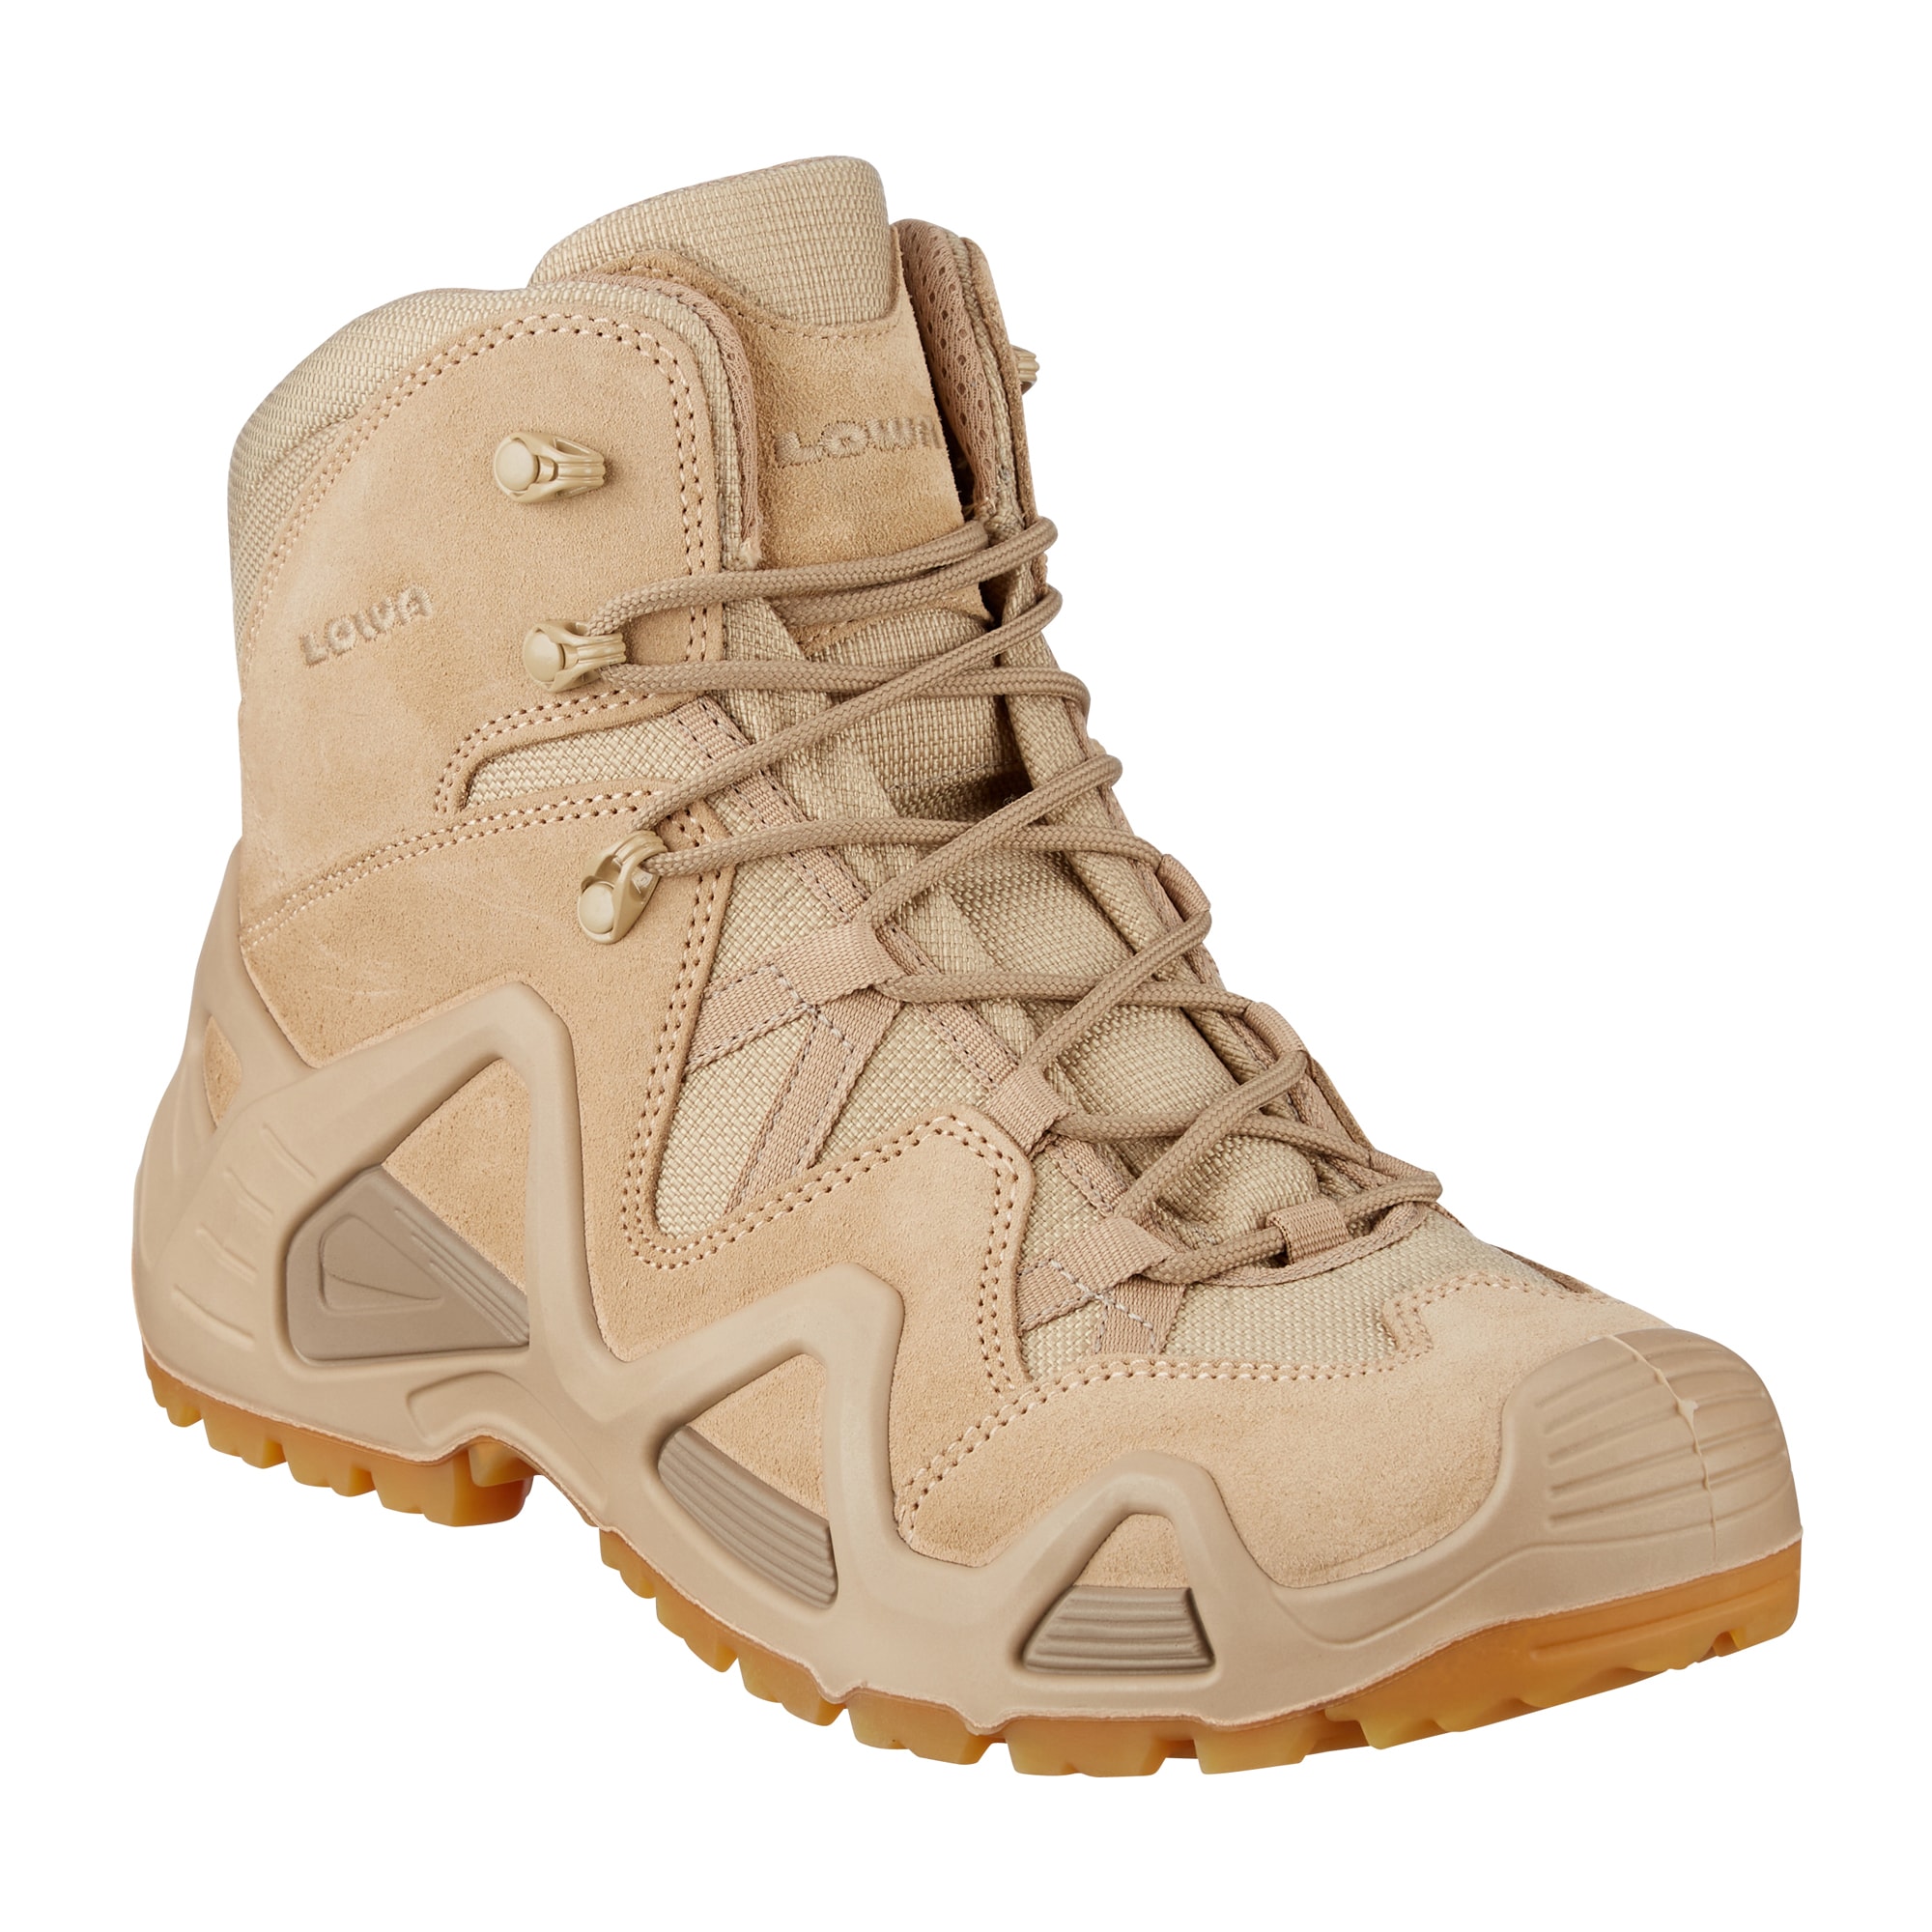 Purchase the Boot LOWA Zephyr Mid TF beige by ASMC